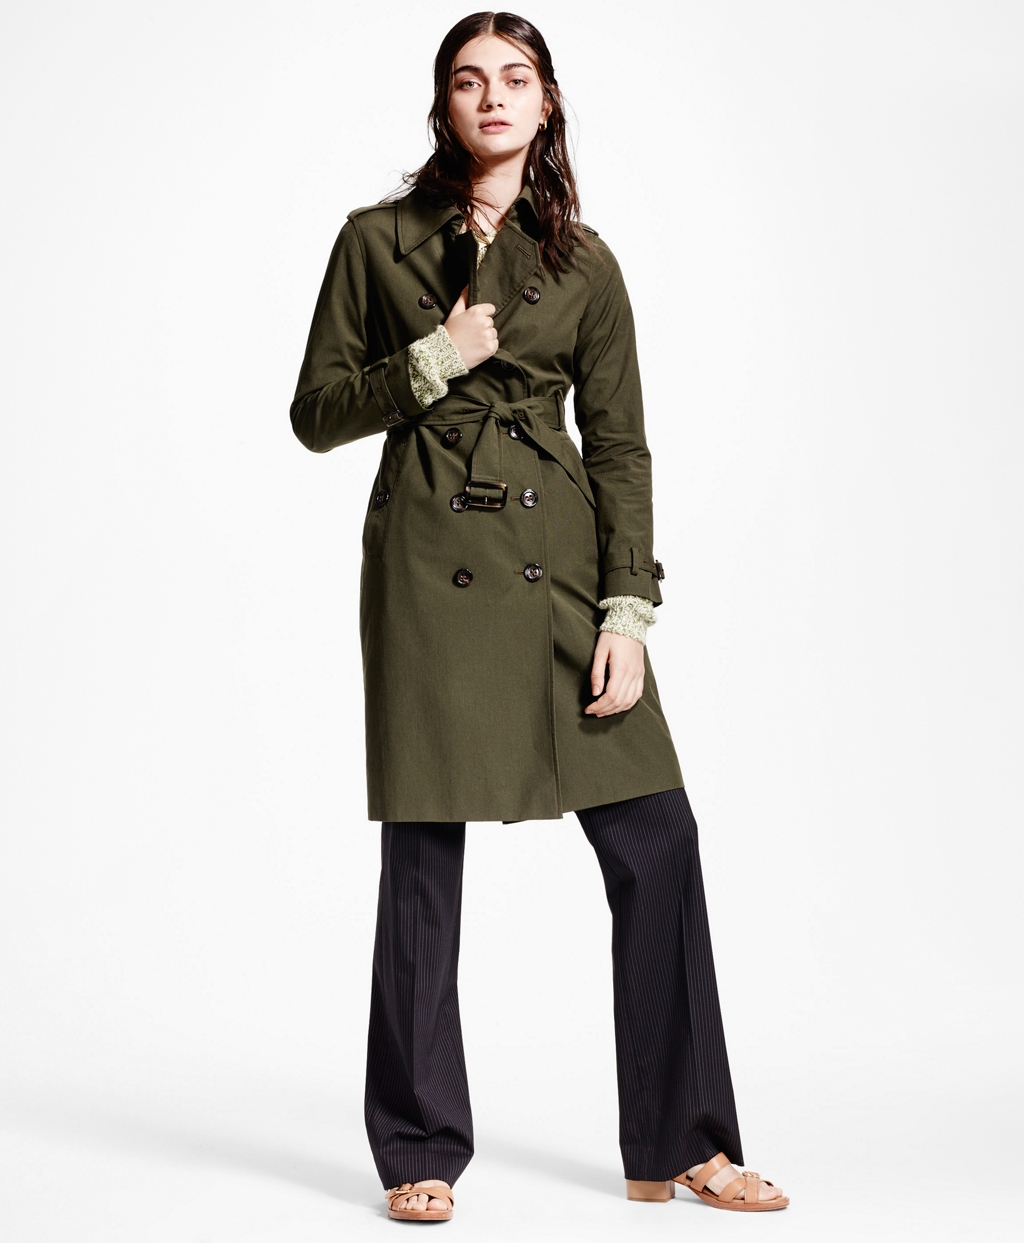 Lyst - Brooks Brothers Micro-houndstooth Trench Coat in Green